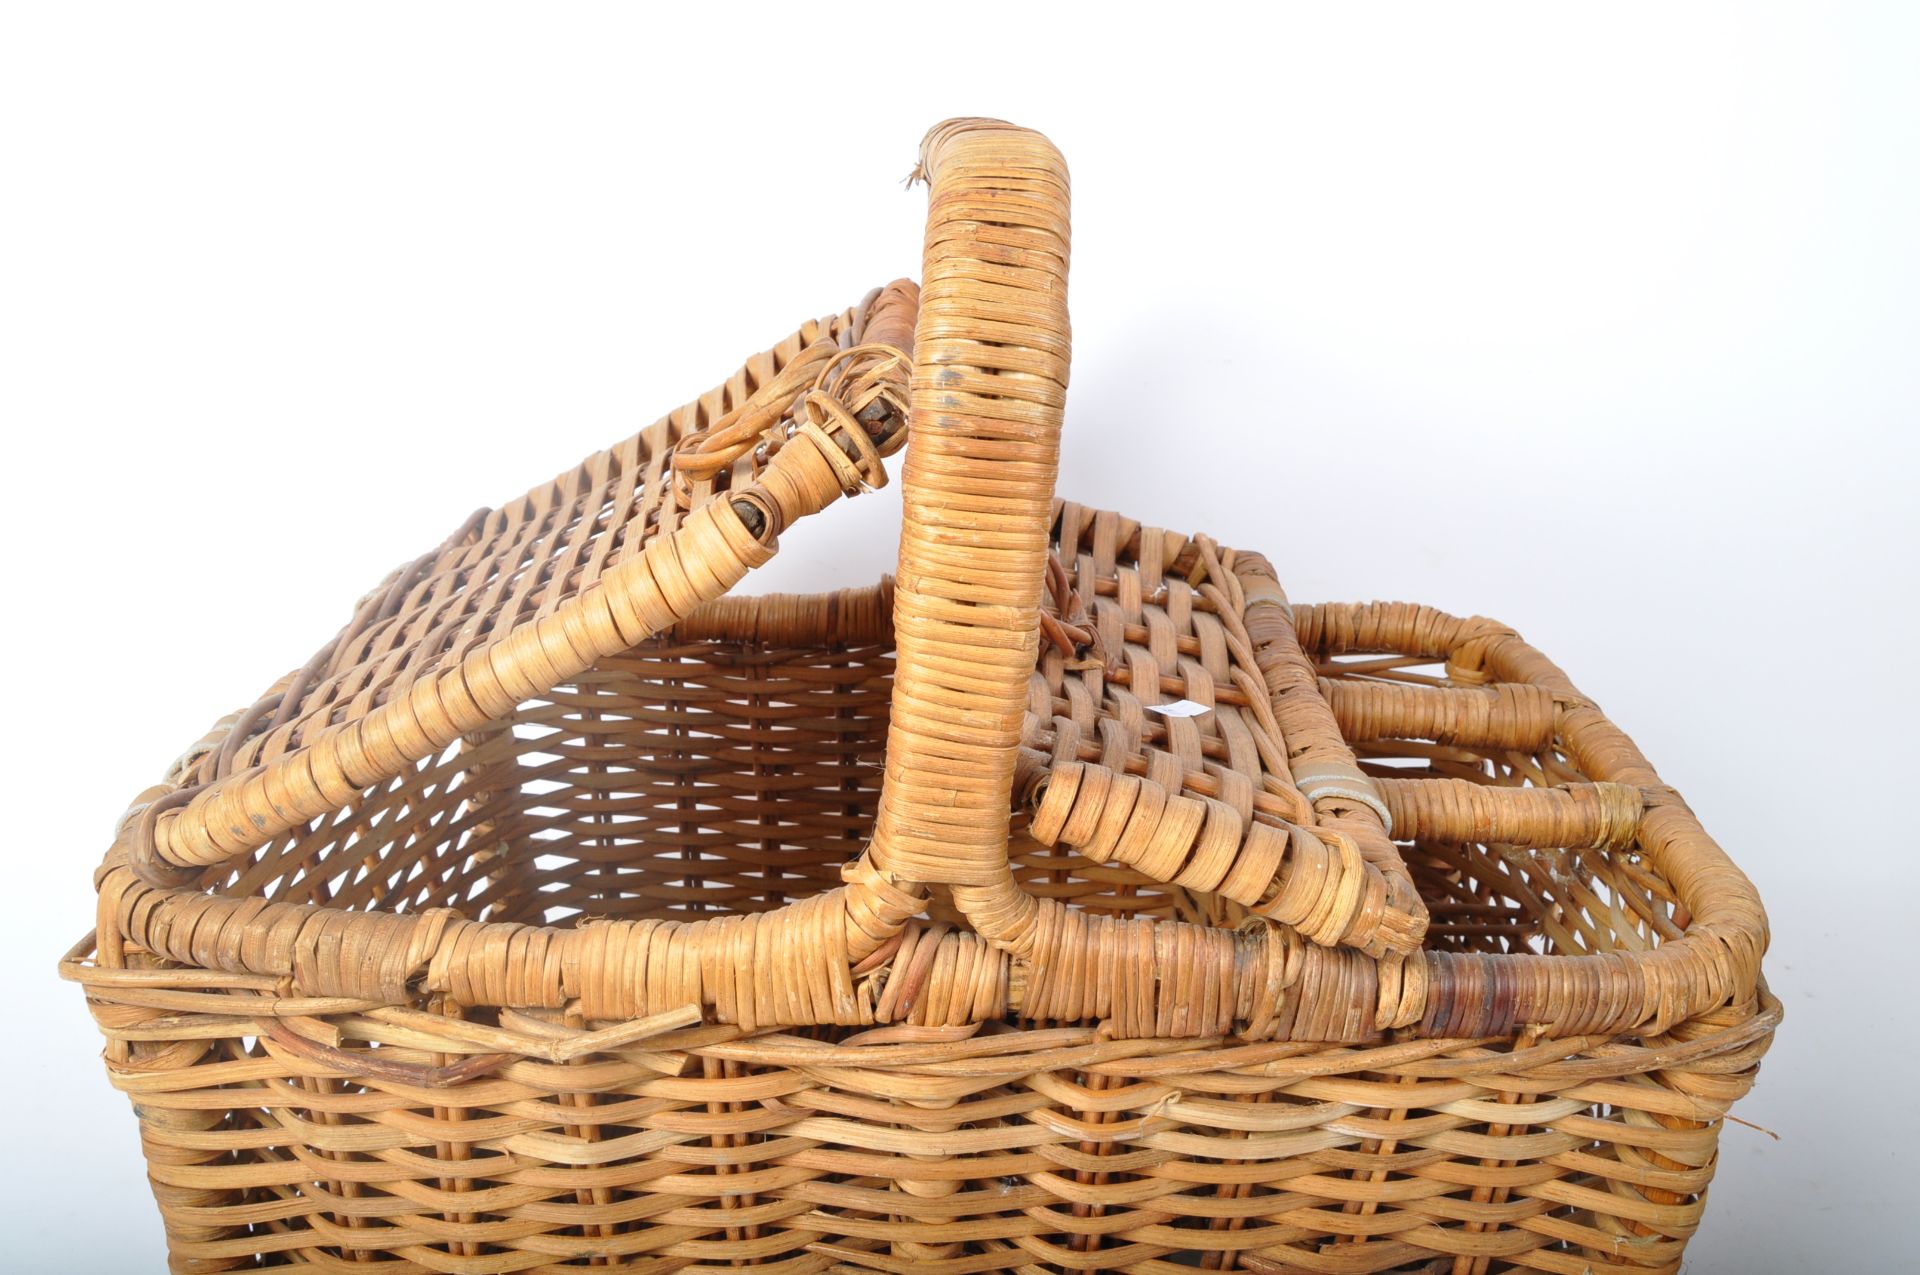 MID 20TH CENTURY WICKER WOVEN PICNIC BASKET - Image 5 of 5